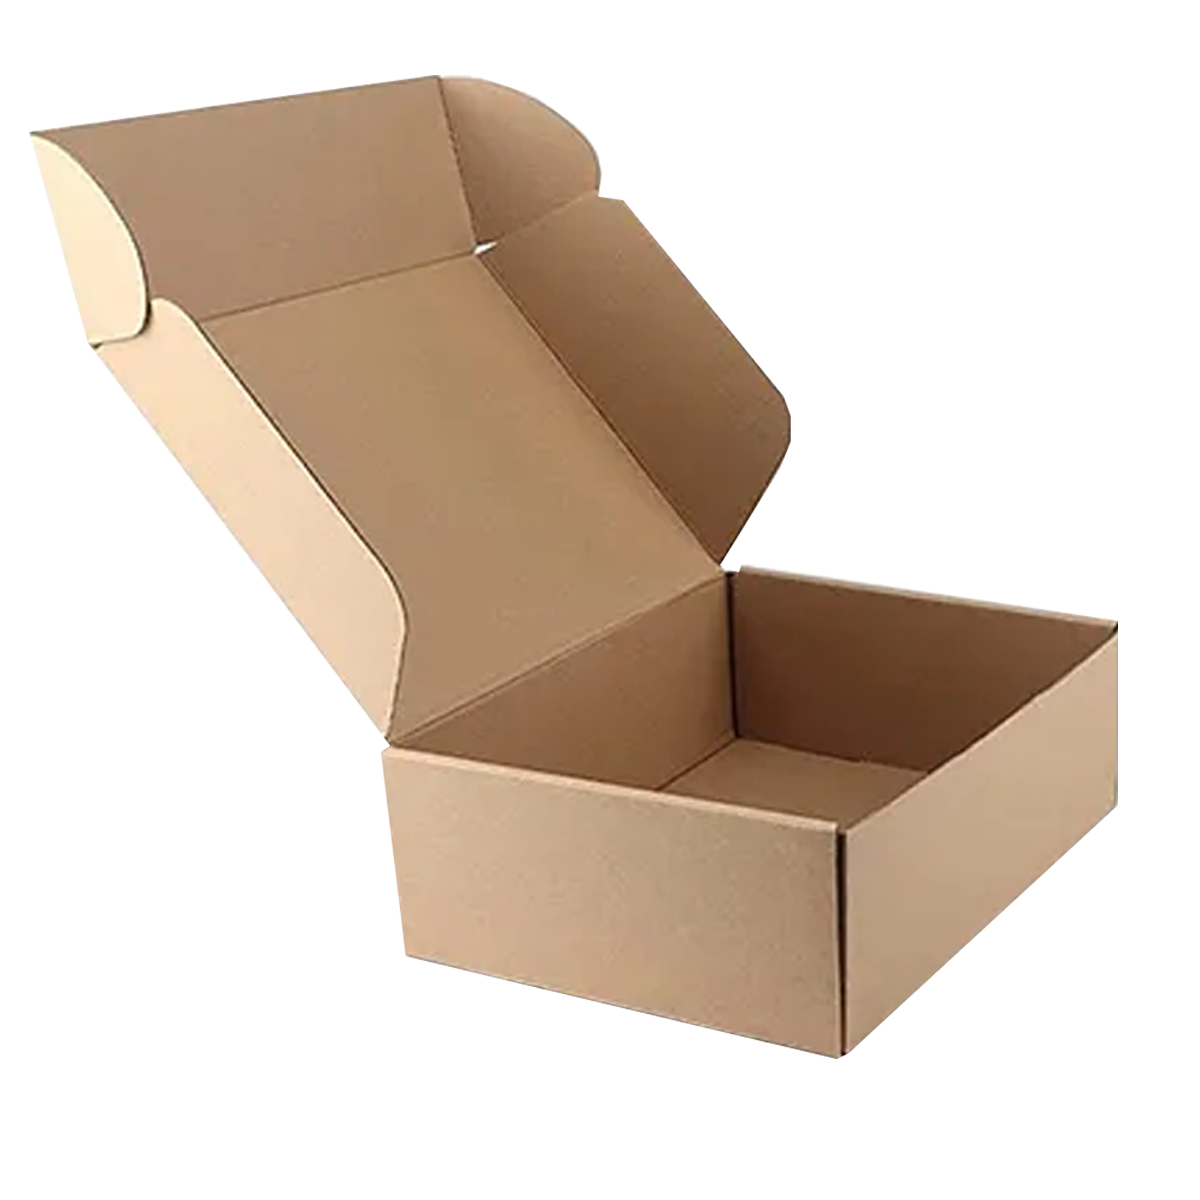 MT Products Sturdy Corrugated Cardboard Shipping and Mailing Boxes - MT  Products